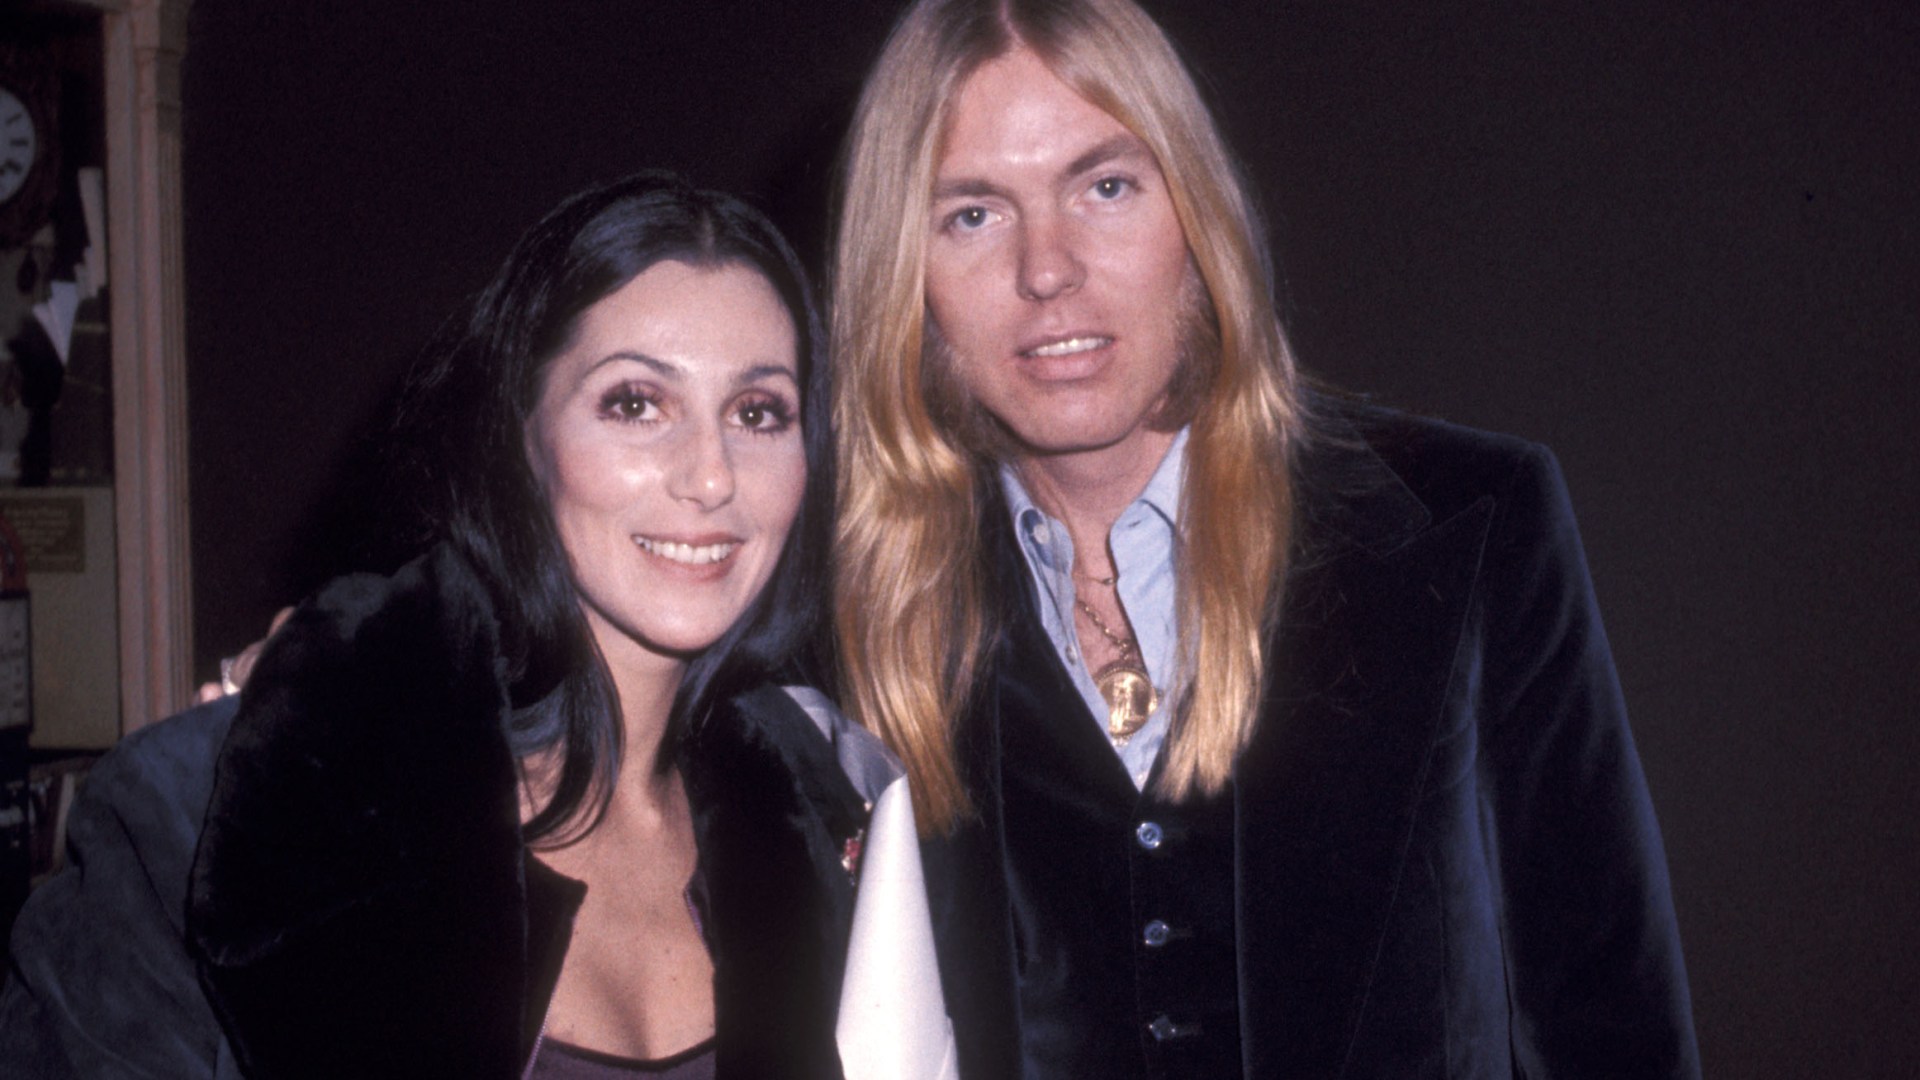 Did You Know Gregg Allman and Cher Have a Son Together? Meet Elijah